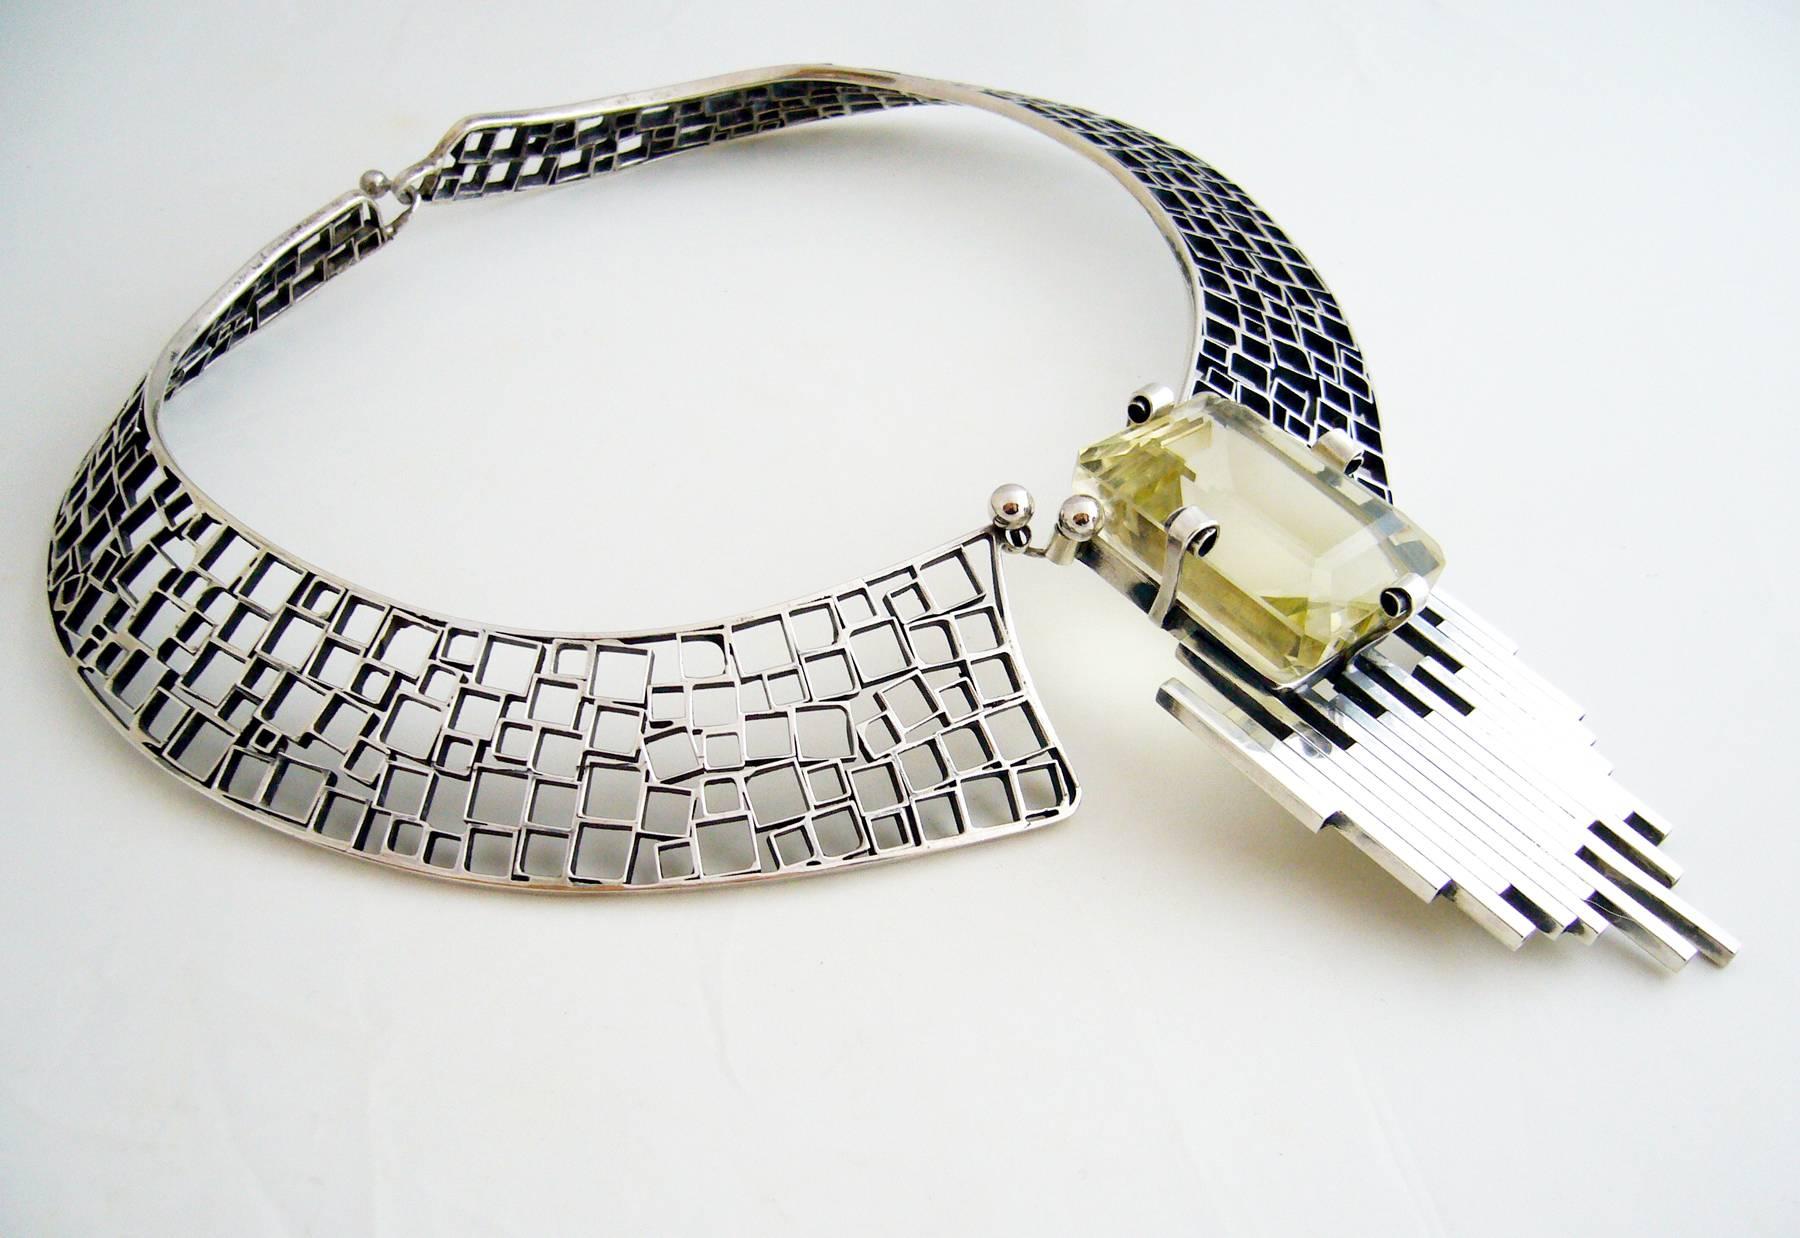 Sterling silver and lemon quartz necklace created by Aaron Rubinstein of Cincinnati, Ohio. Necklace has a wearable neck length of about 18